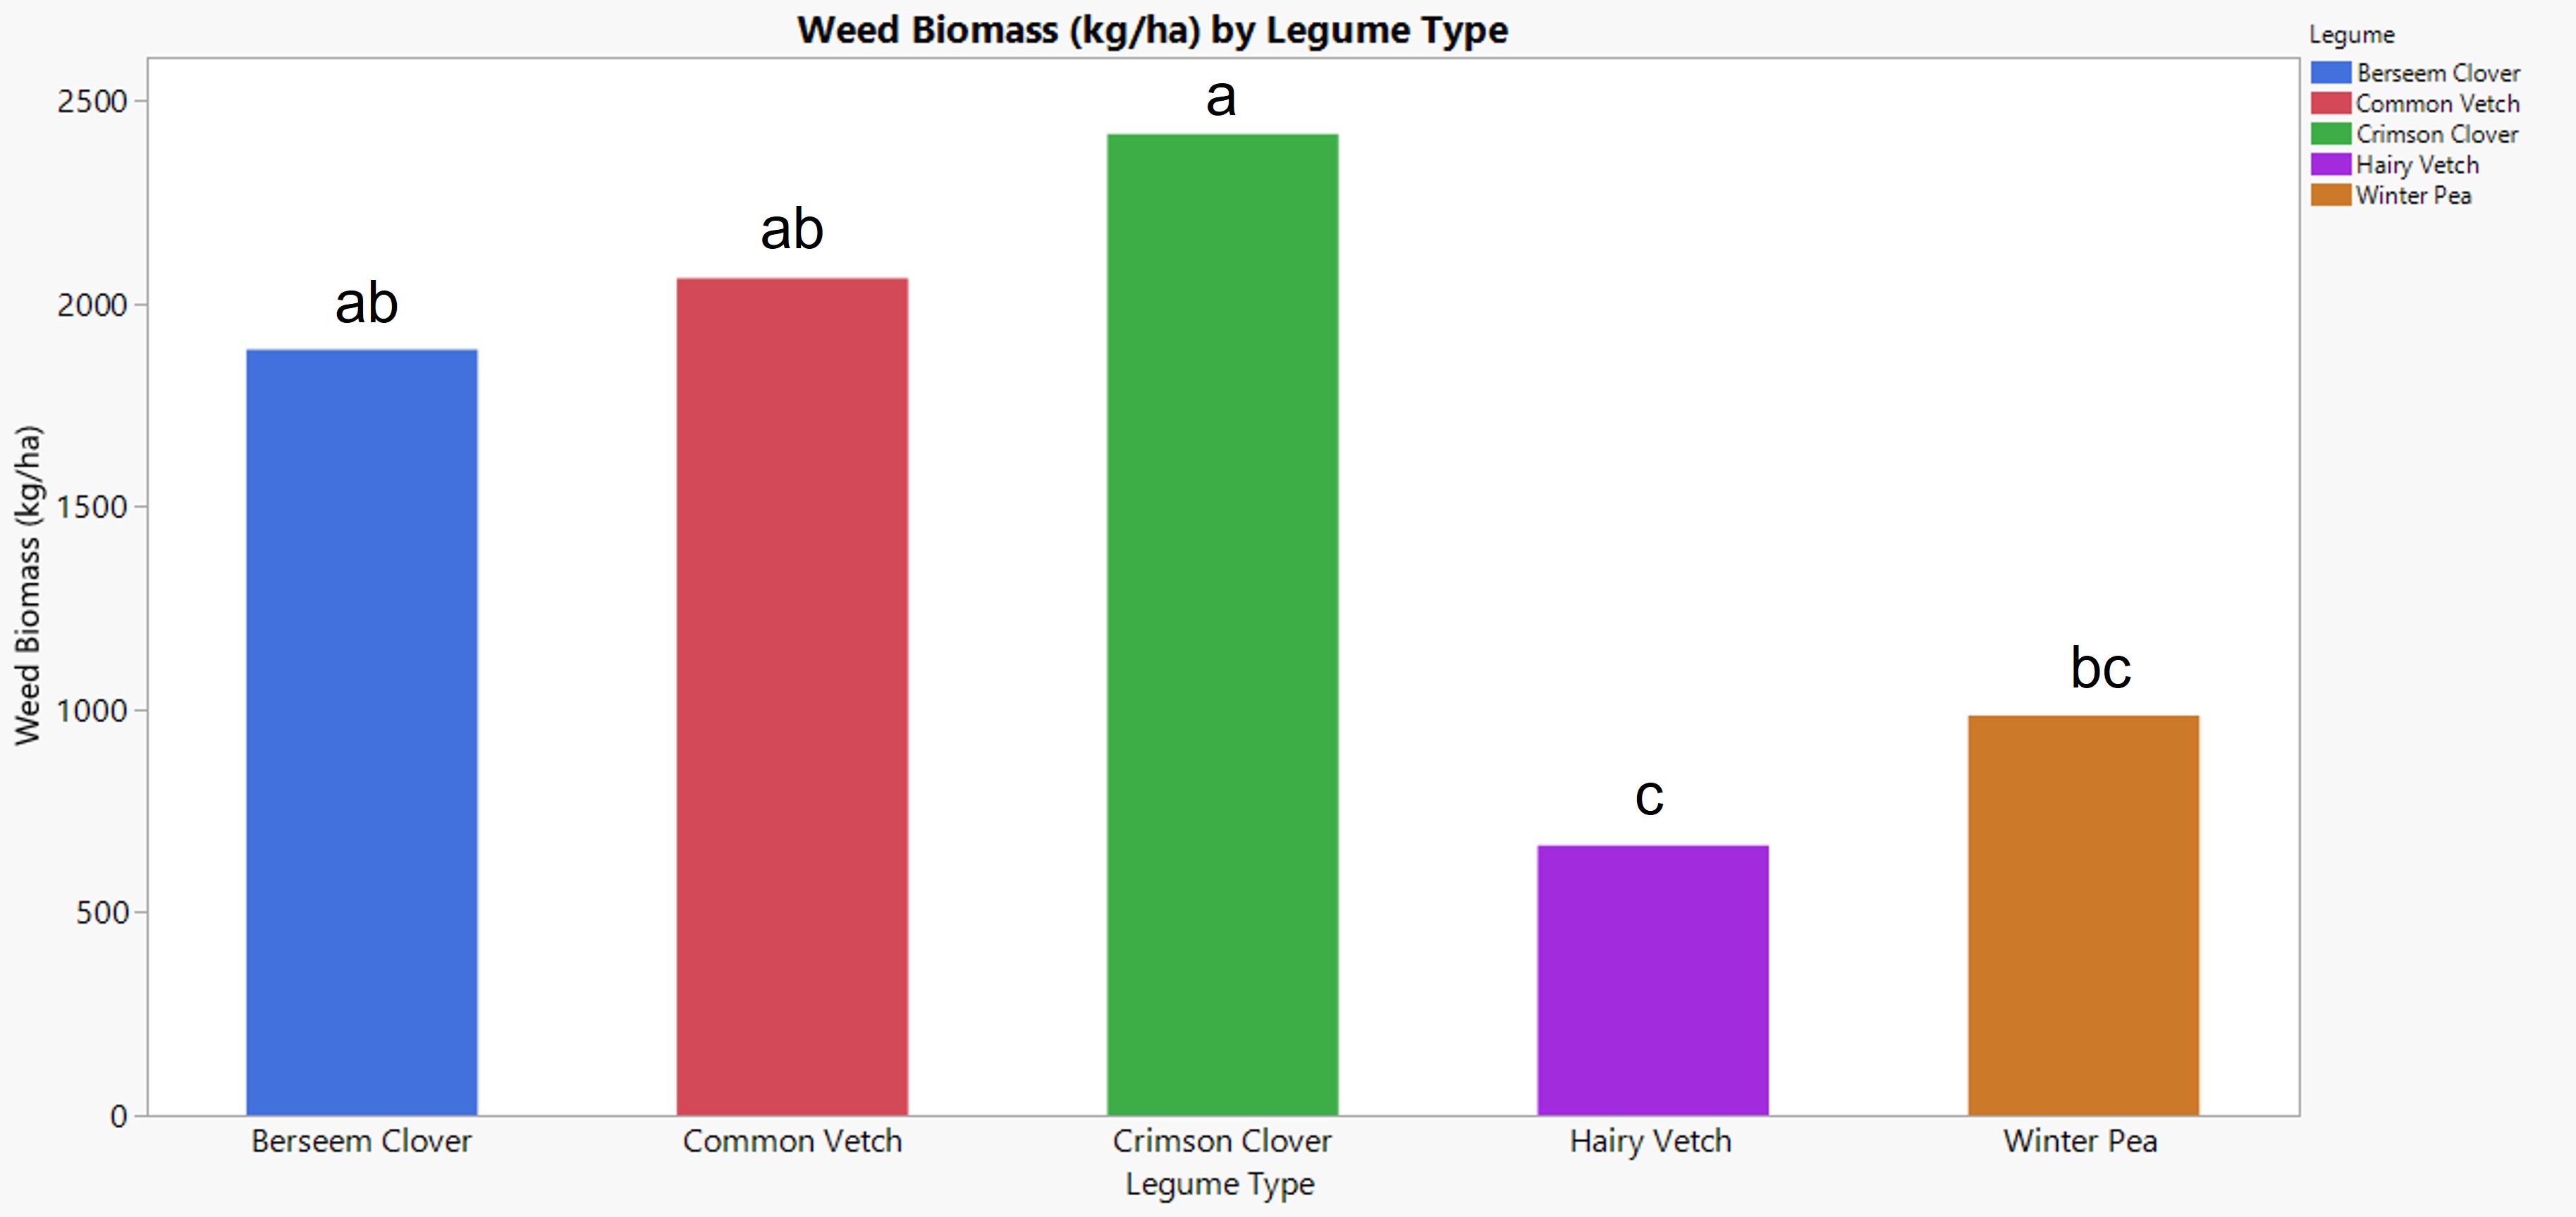 Bar graph showing the amount of weed biomass for each cover crop treatment. The order of cover crop with the highest to lowest weed biomass is as follows: 1) crimson clover, 2) common vetch, 3) berseem clover, 4) winter pea, and 5) hairy vetch. 